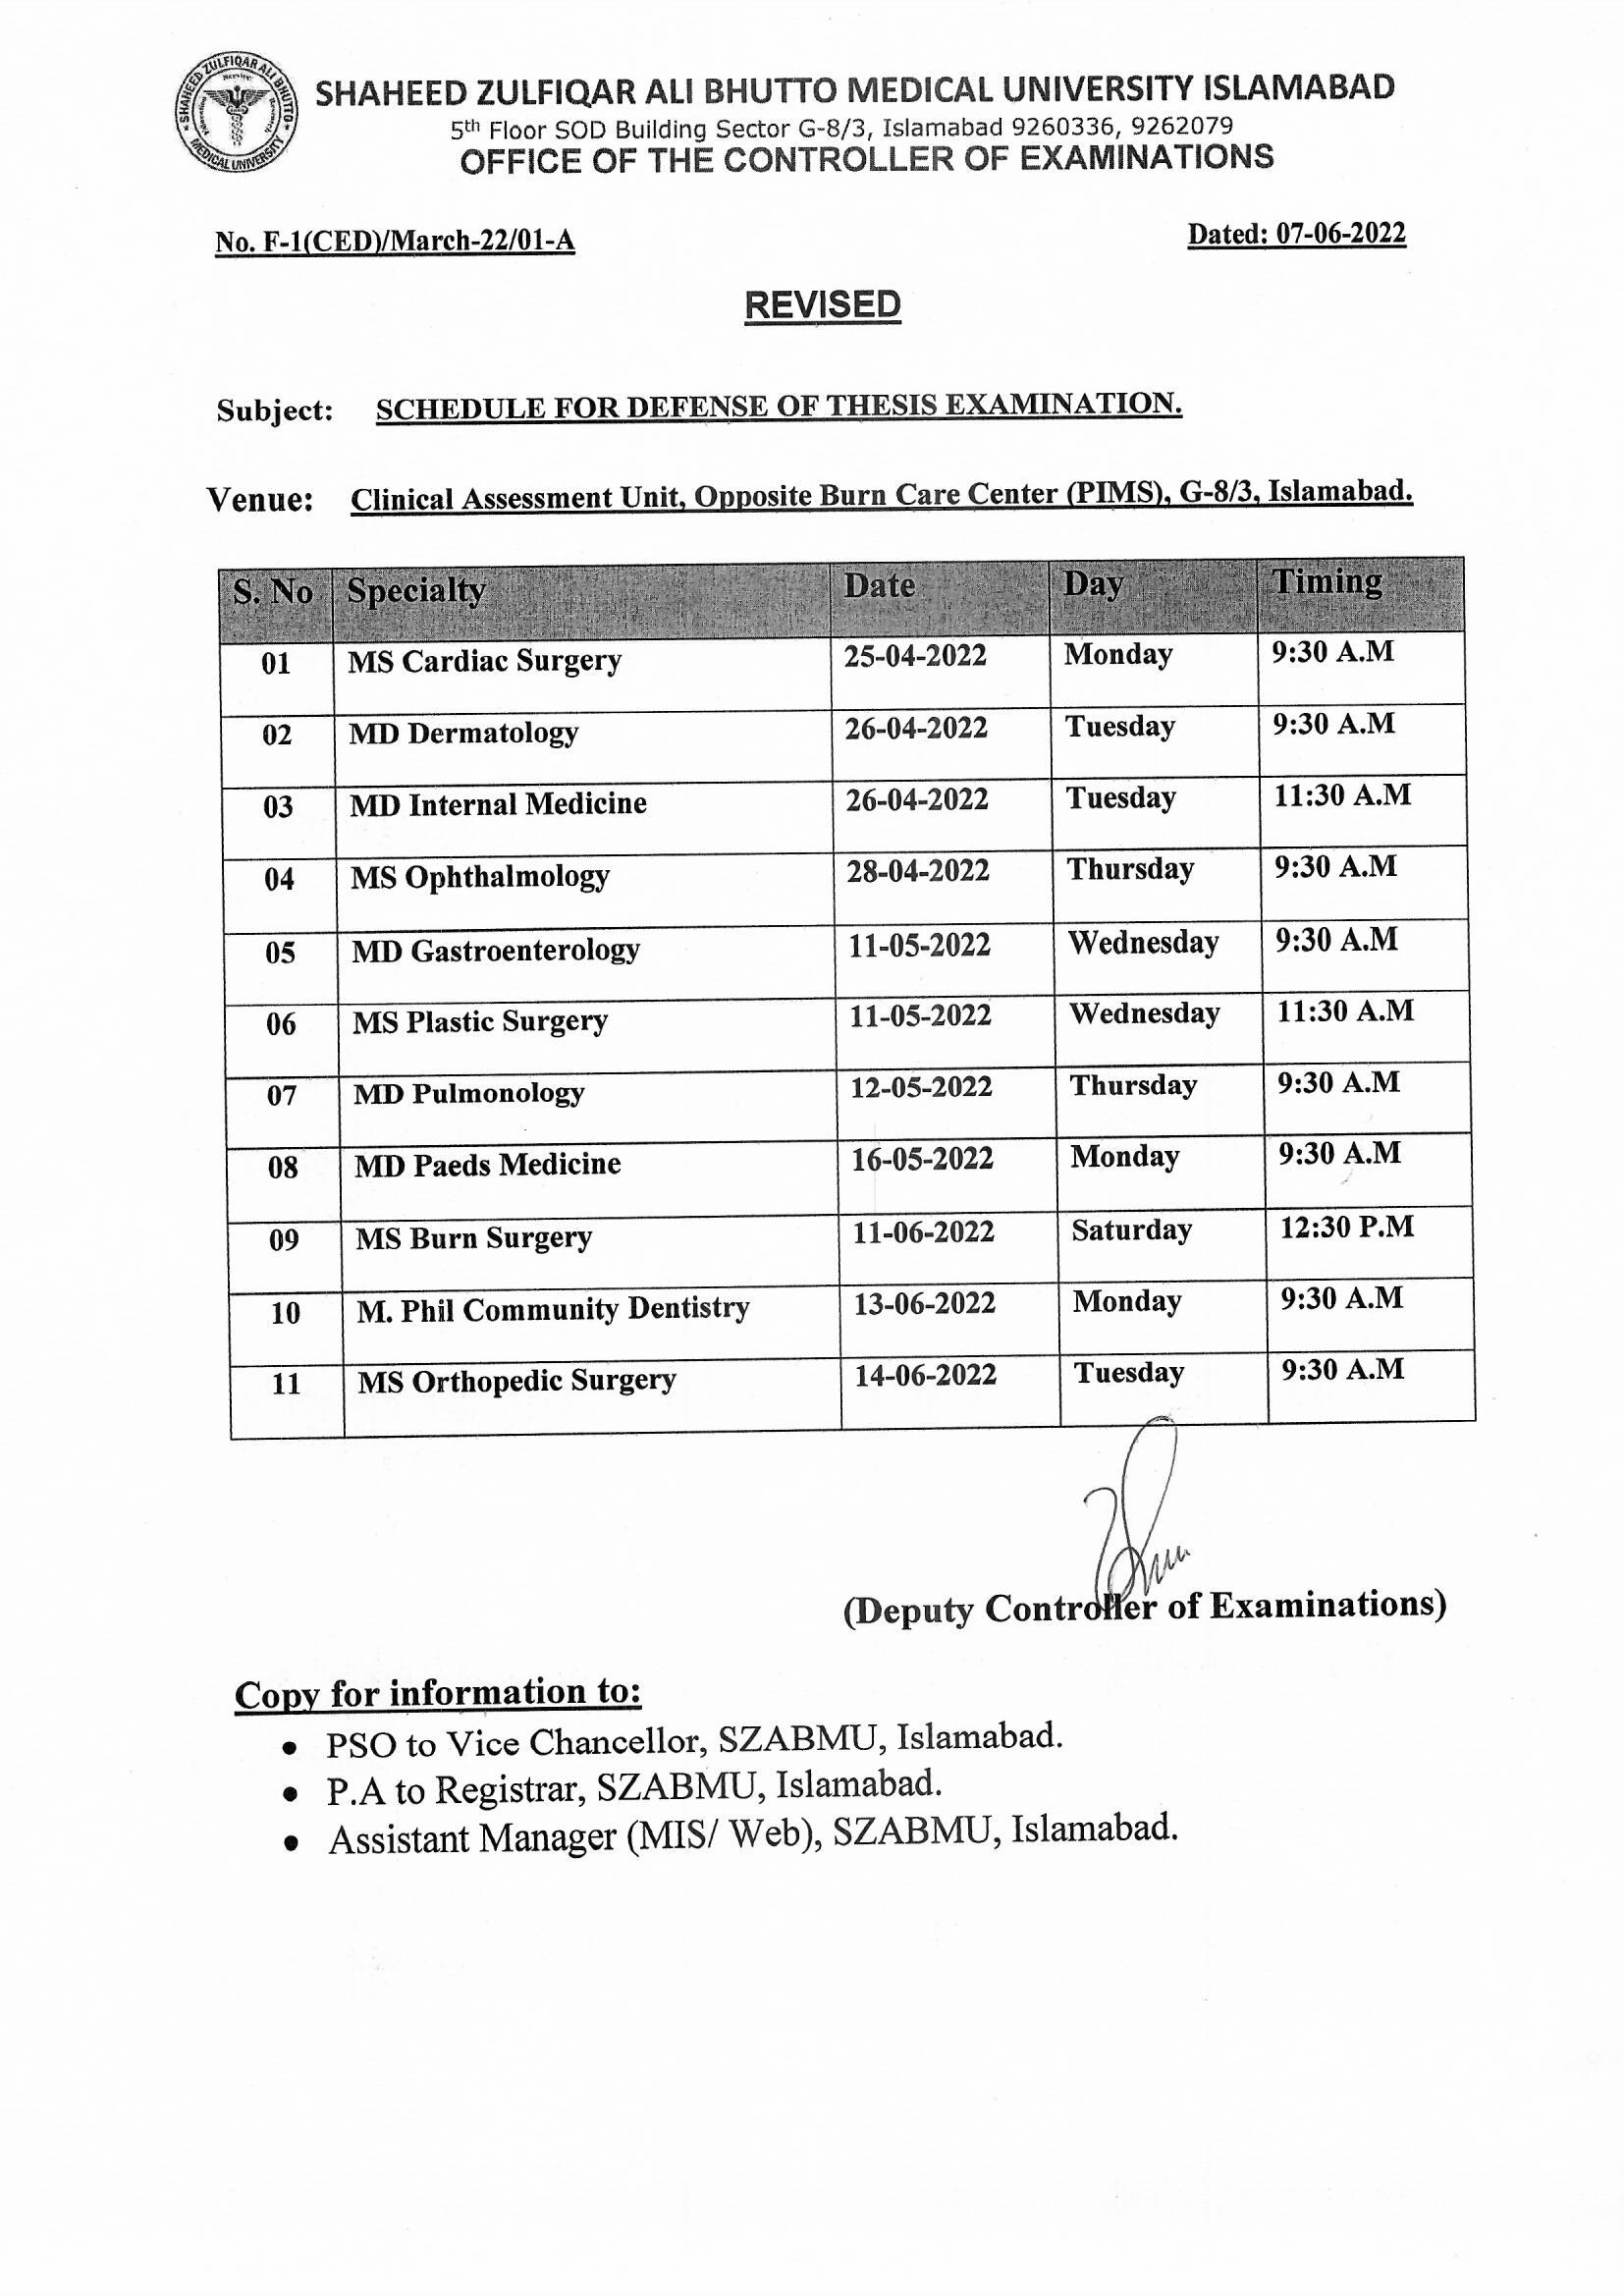 Revised Schedule for Defense of Thesis Examination